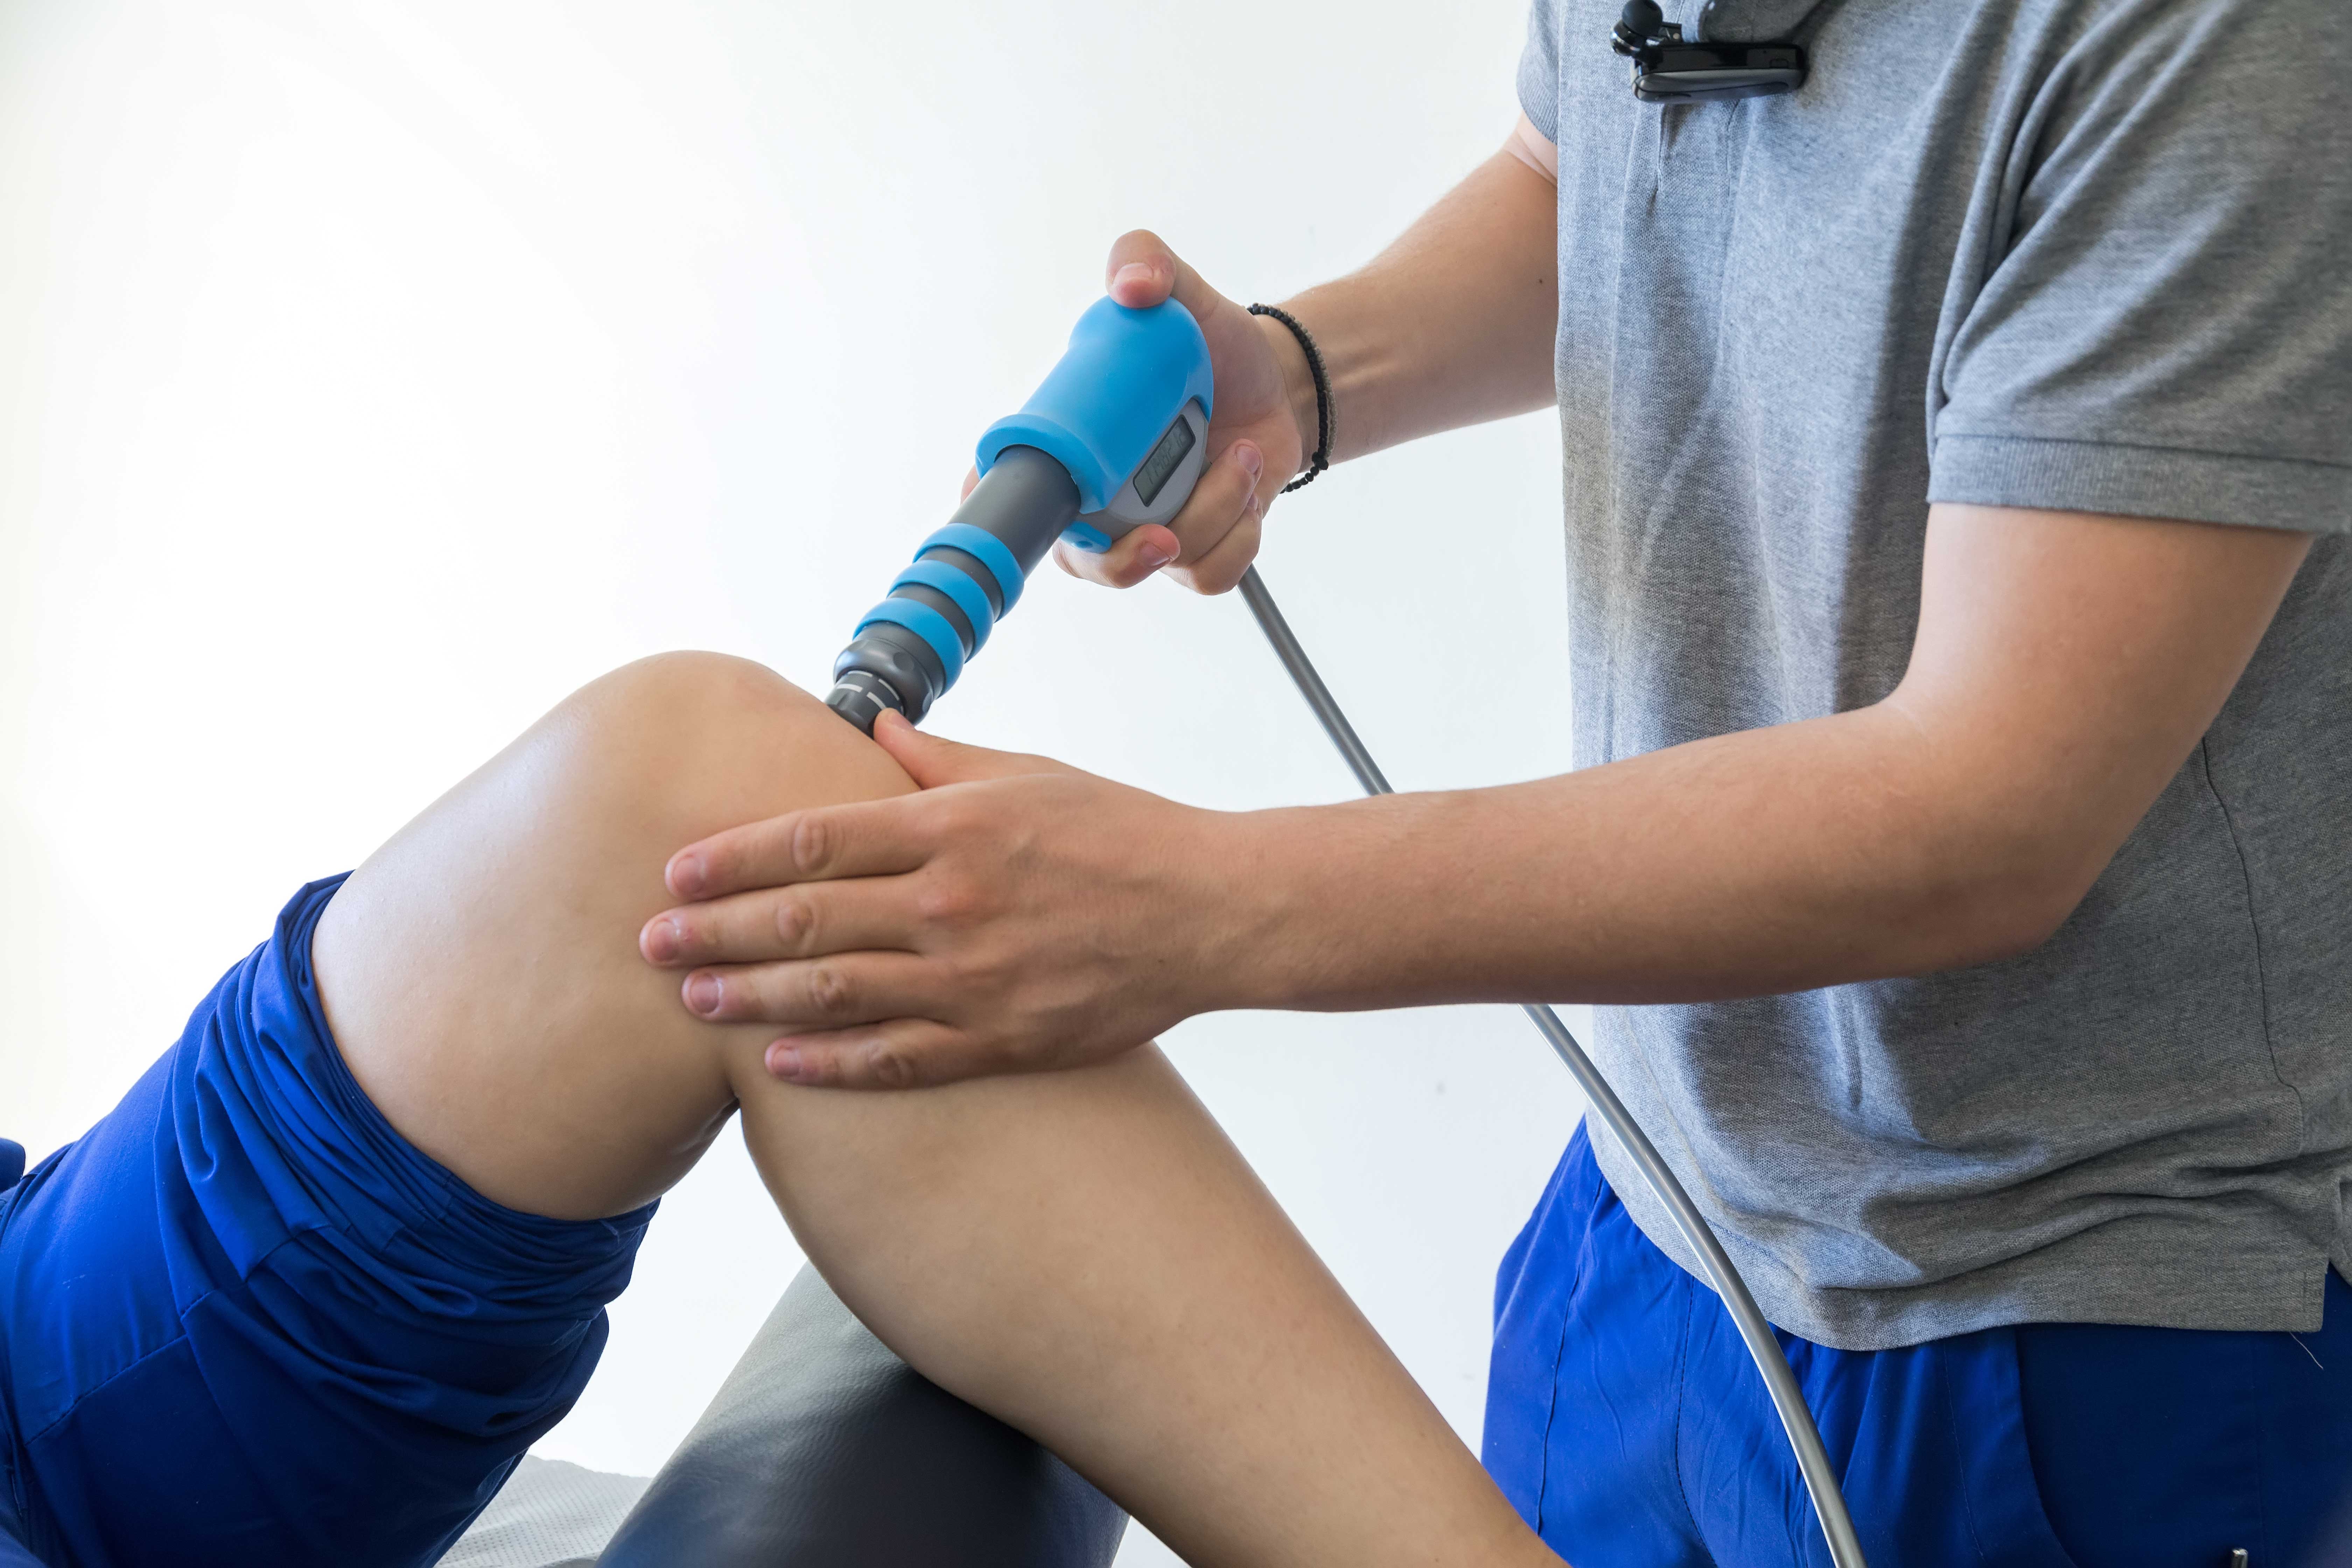 shockwave therapy session taking place on a patient's knee